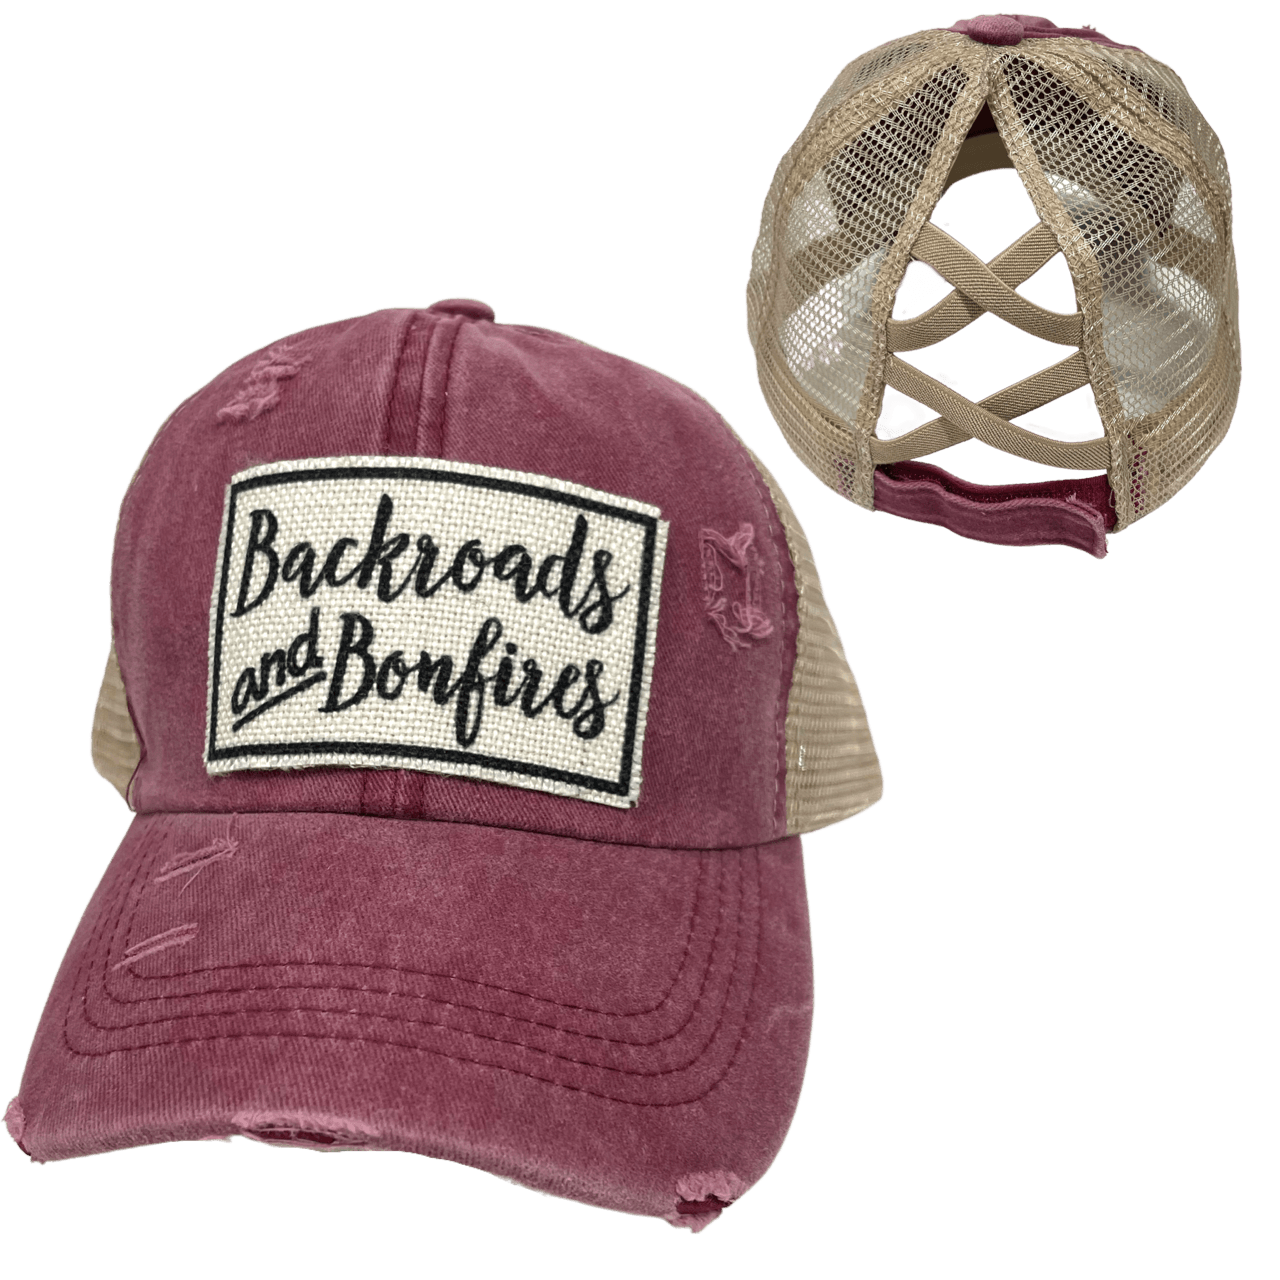 BACKROADS AND BONFIRES CRISS-CROSS PONYTAIL HAT - Doodlations Coffee Bar & Boutique